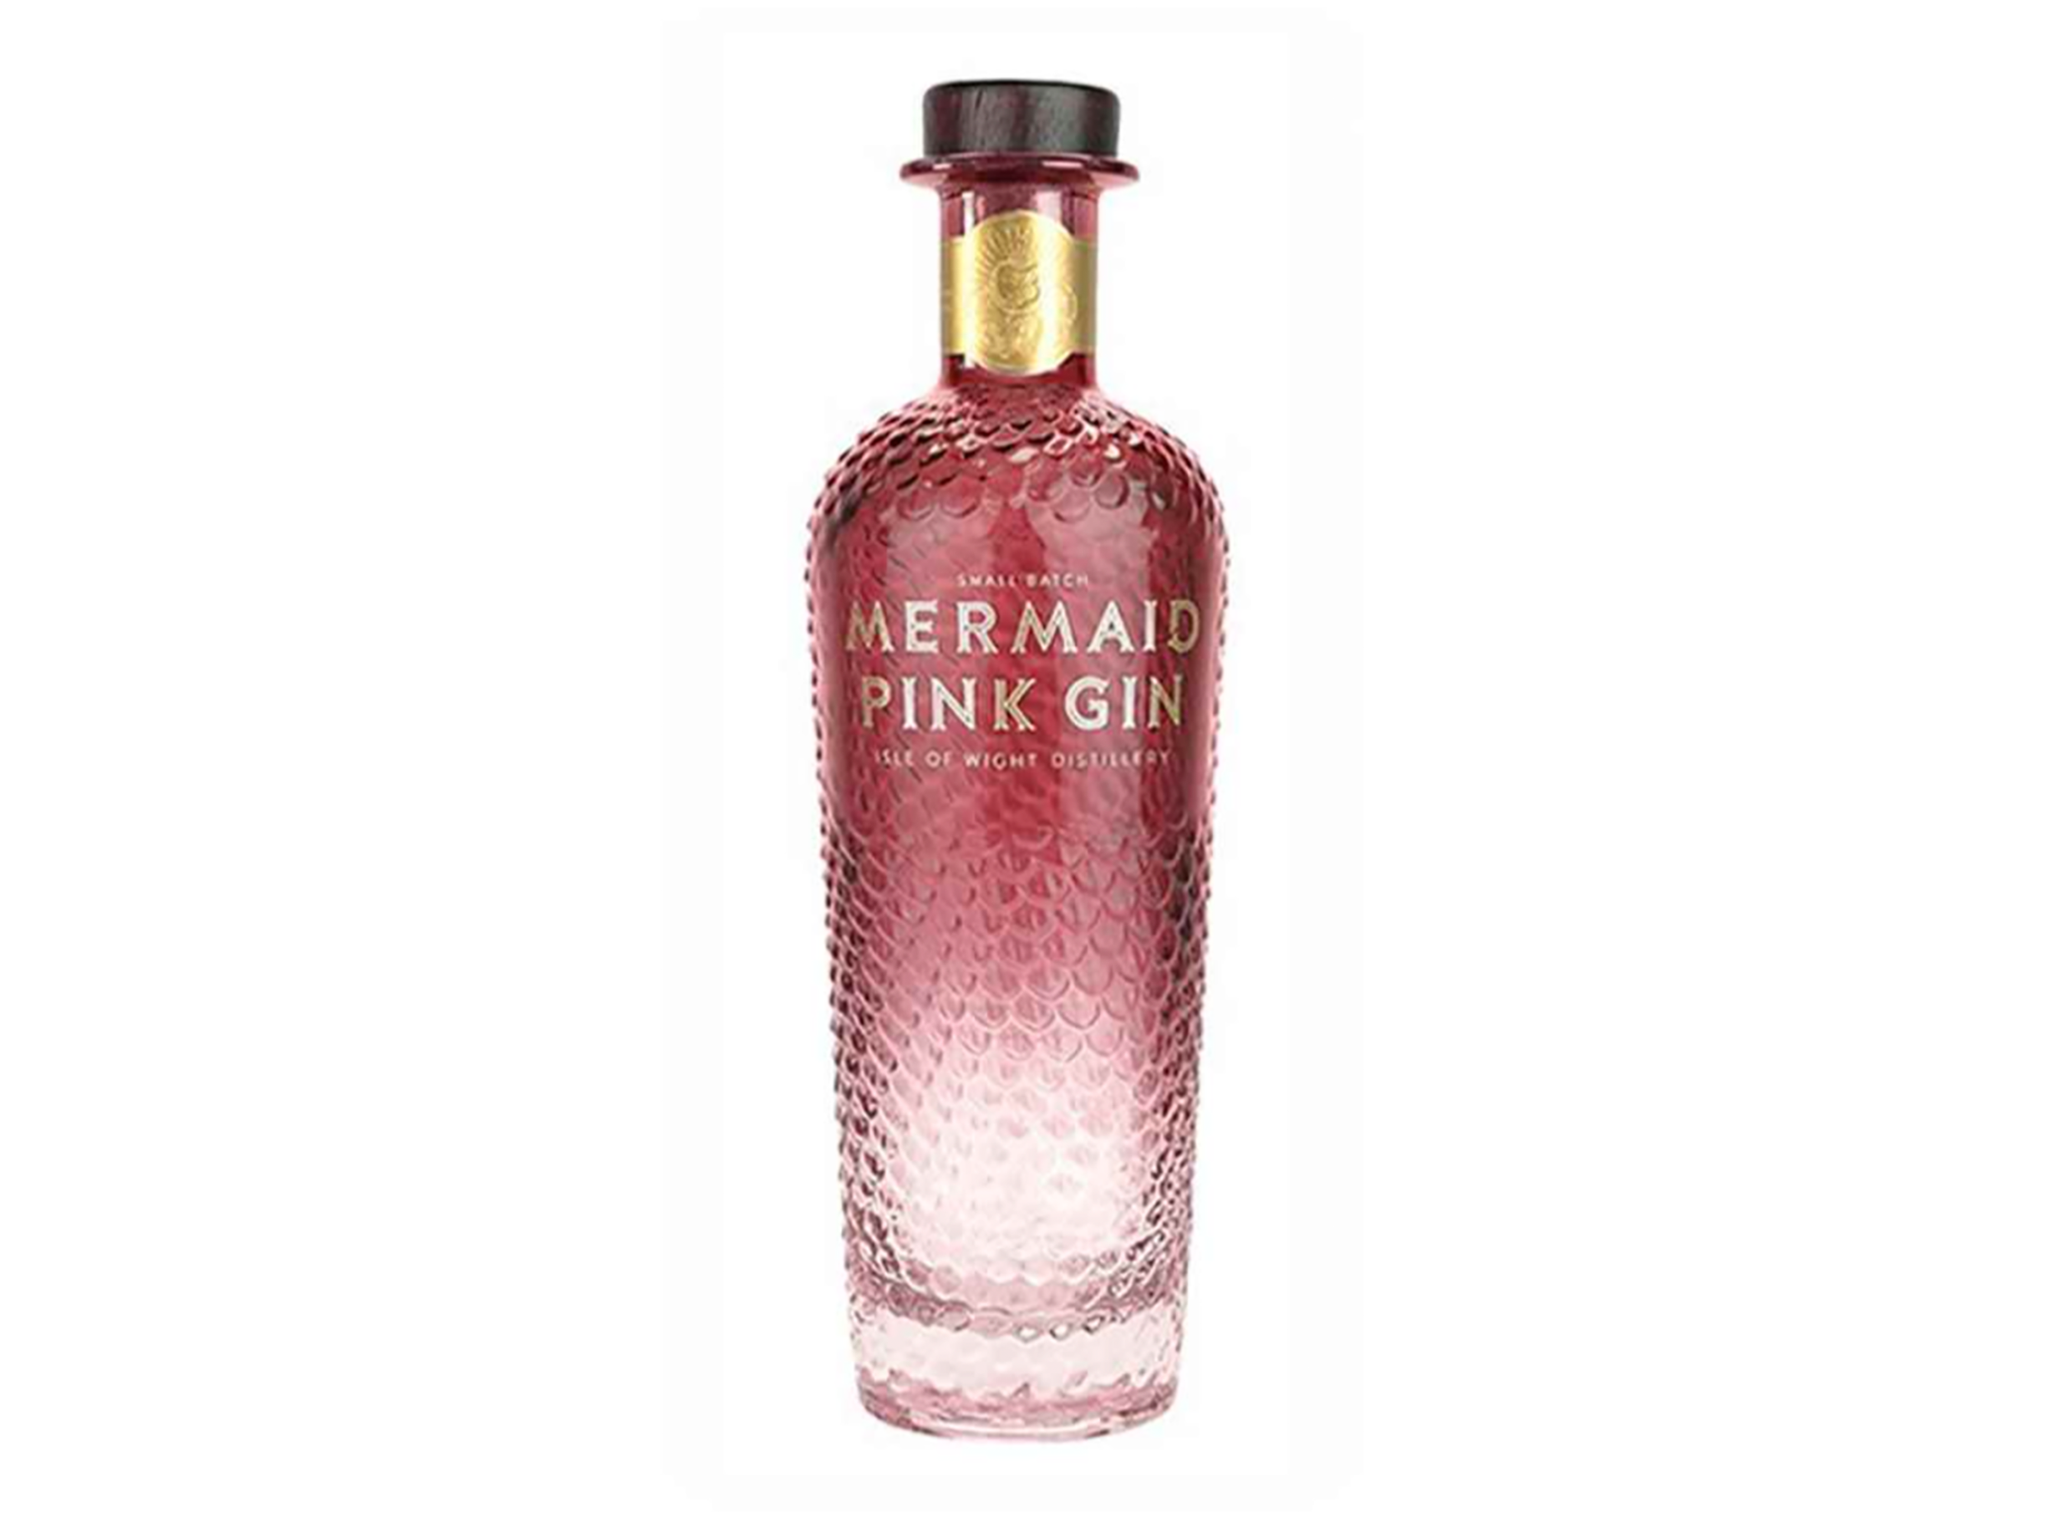 The Isle of Wight Distillery mermaid pink gin, 70cl.png